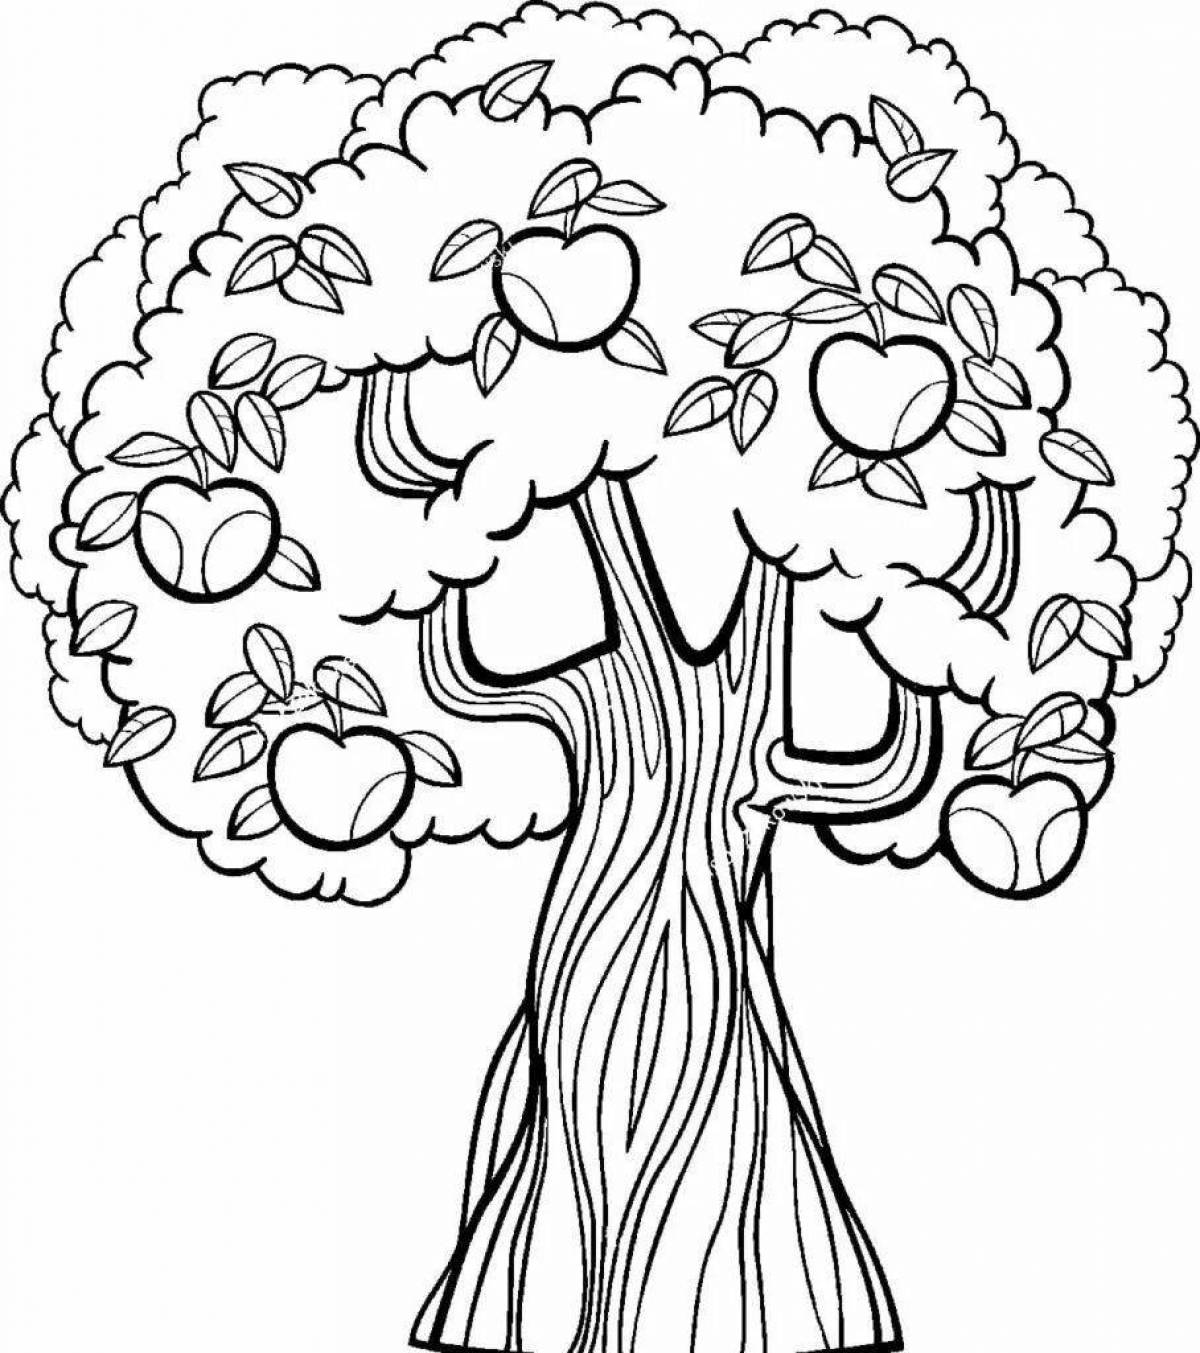 Coloring sublime fairy tree